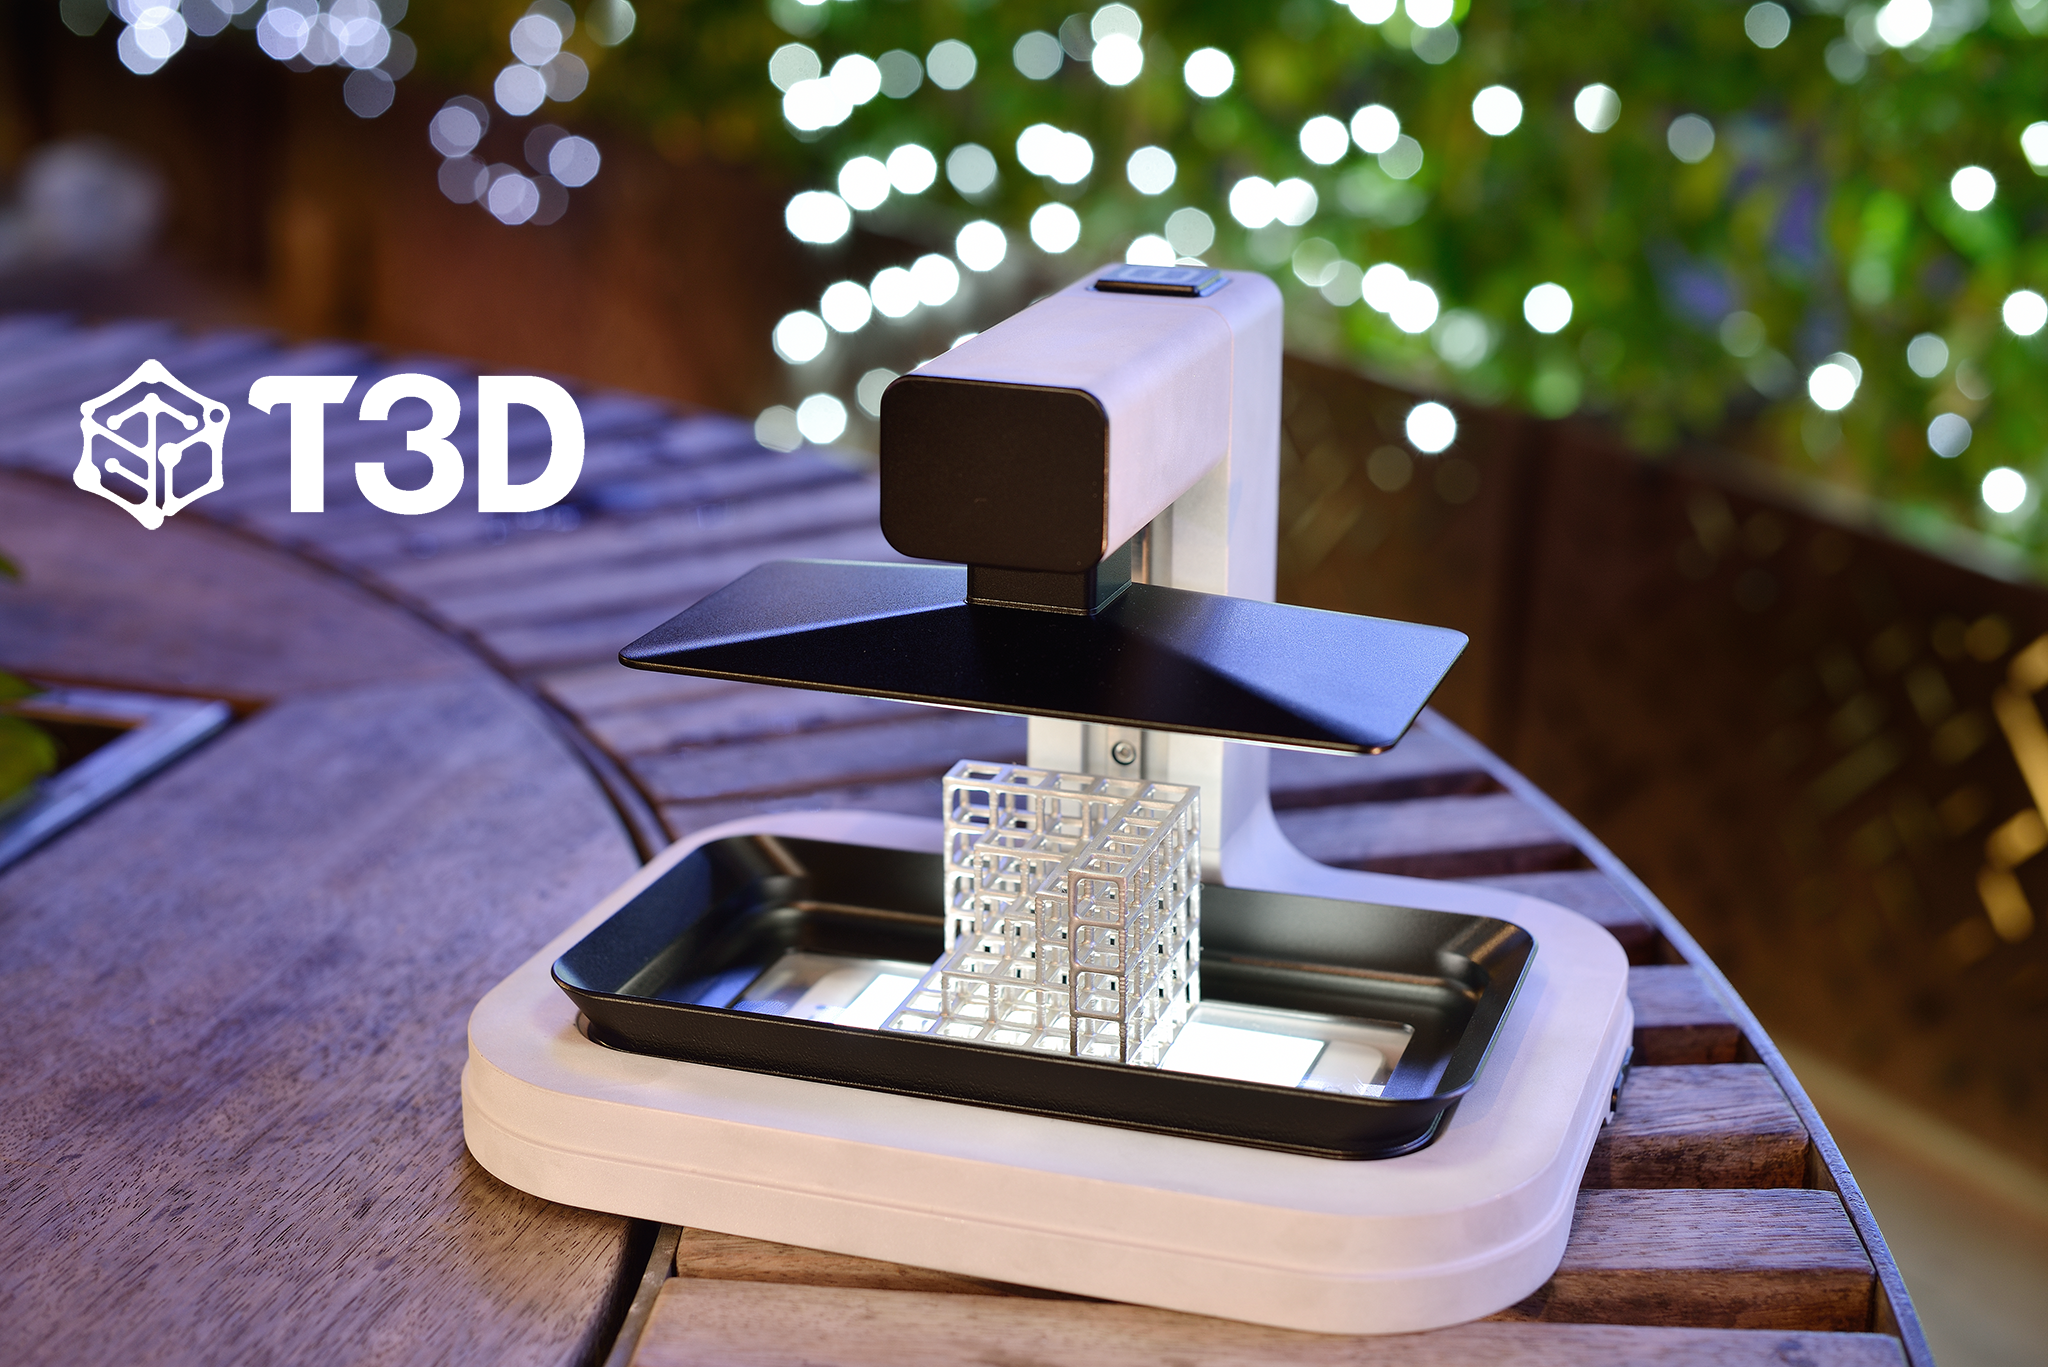 T3D launches Kickstarter for low cost cell powered SLA 3D printer - Printing Industry